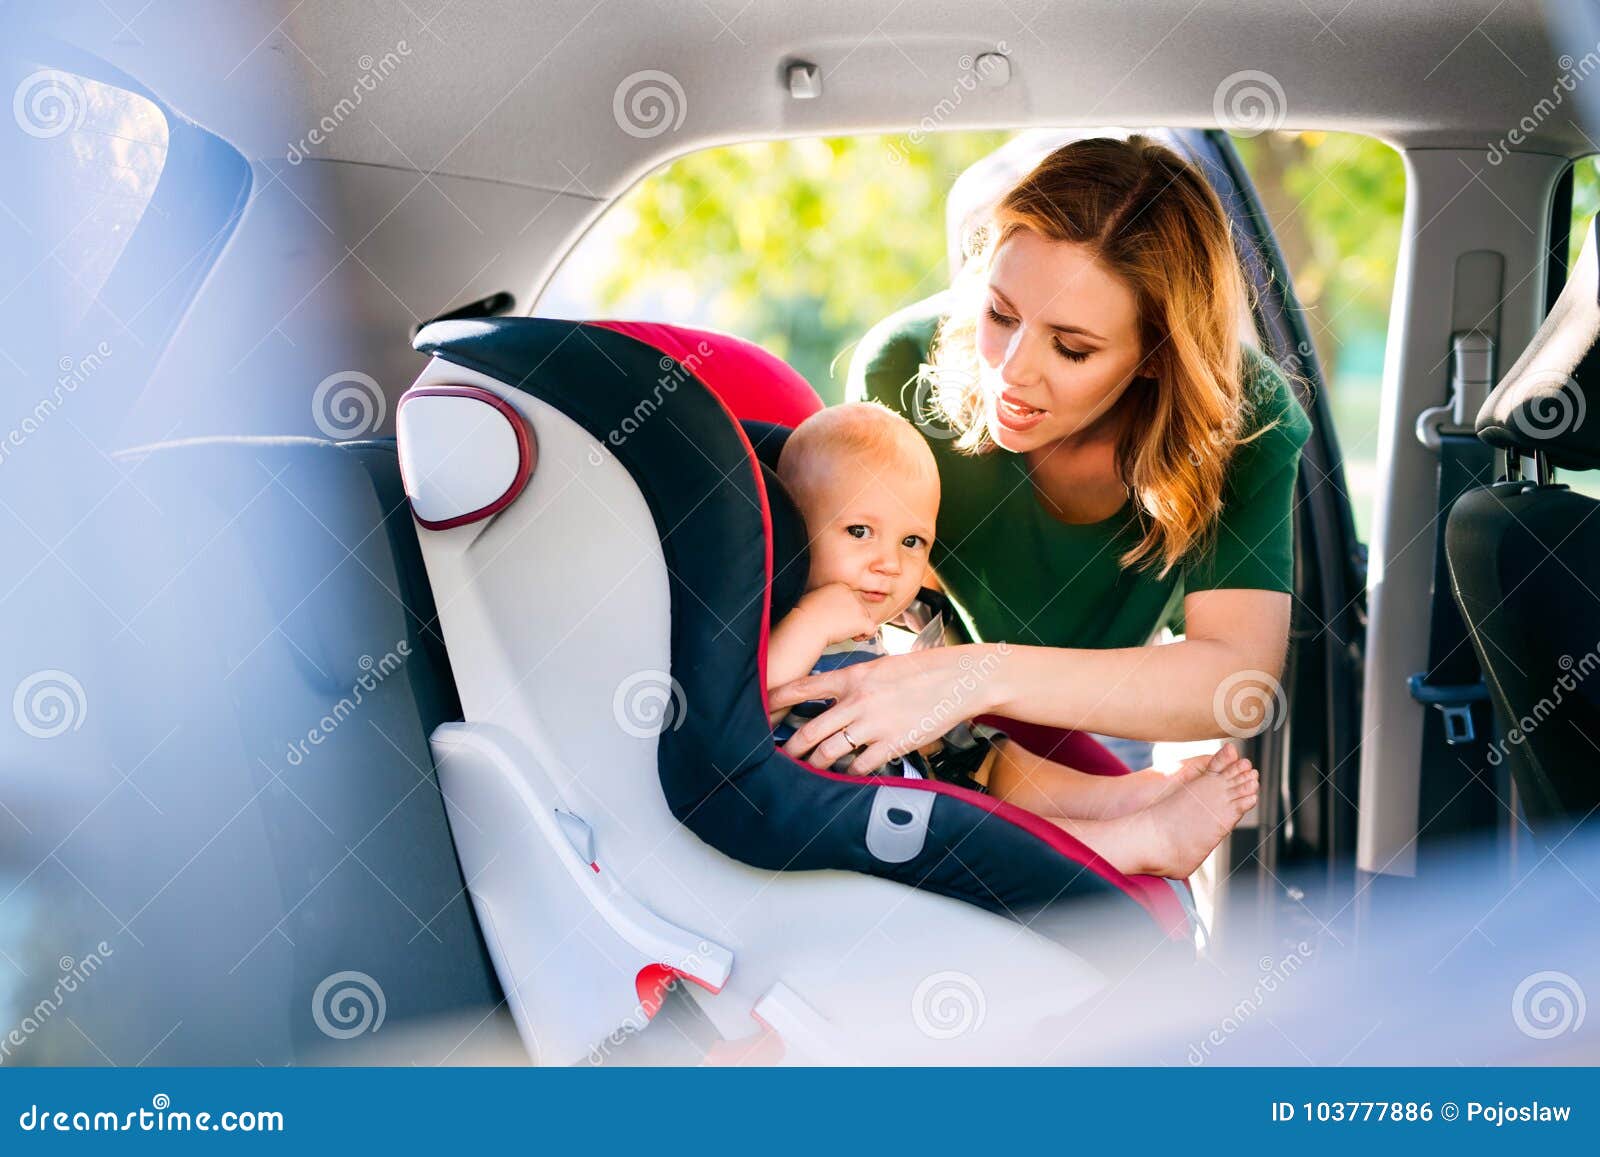 young mother putting baby boy in the car seat.